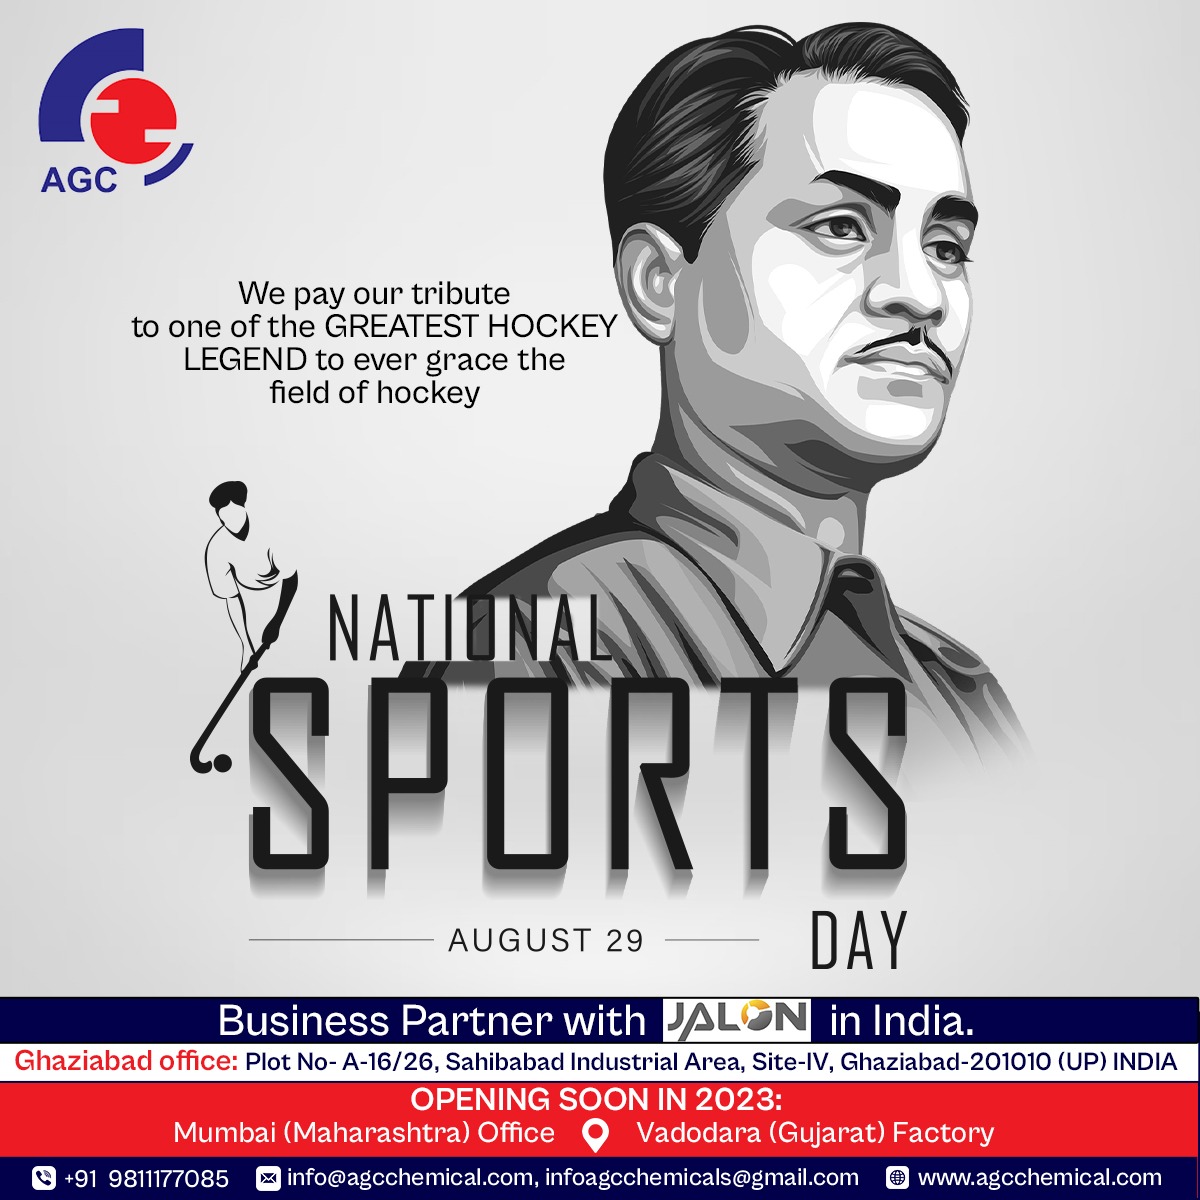 Celebrating NATIONAL SPORTS DAY In the memory of 'The Magician of Hockey' Major Dhyan Chand on his birth anniversary.🏒

#internationasportsday #sportsunity #playwithpassion #healthycompetition #athleticspirit #sportinggear #bigvalueshop #teamworkinsports #sportspassion